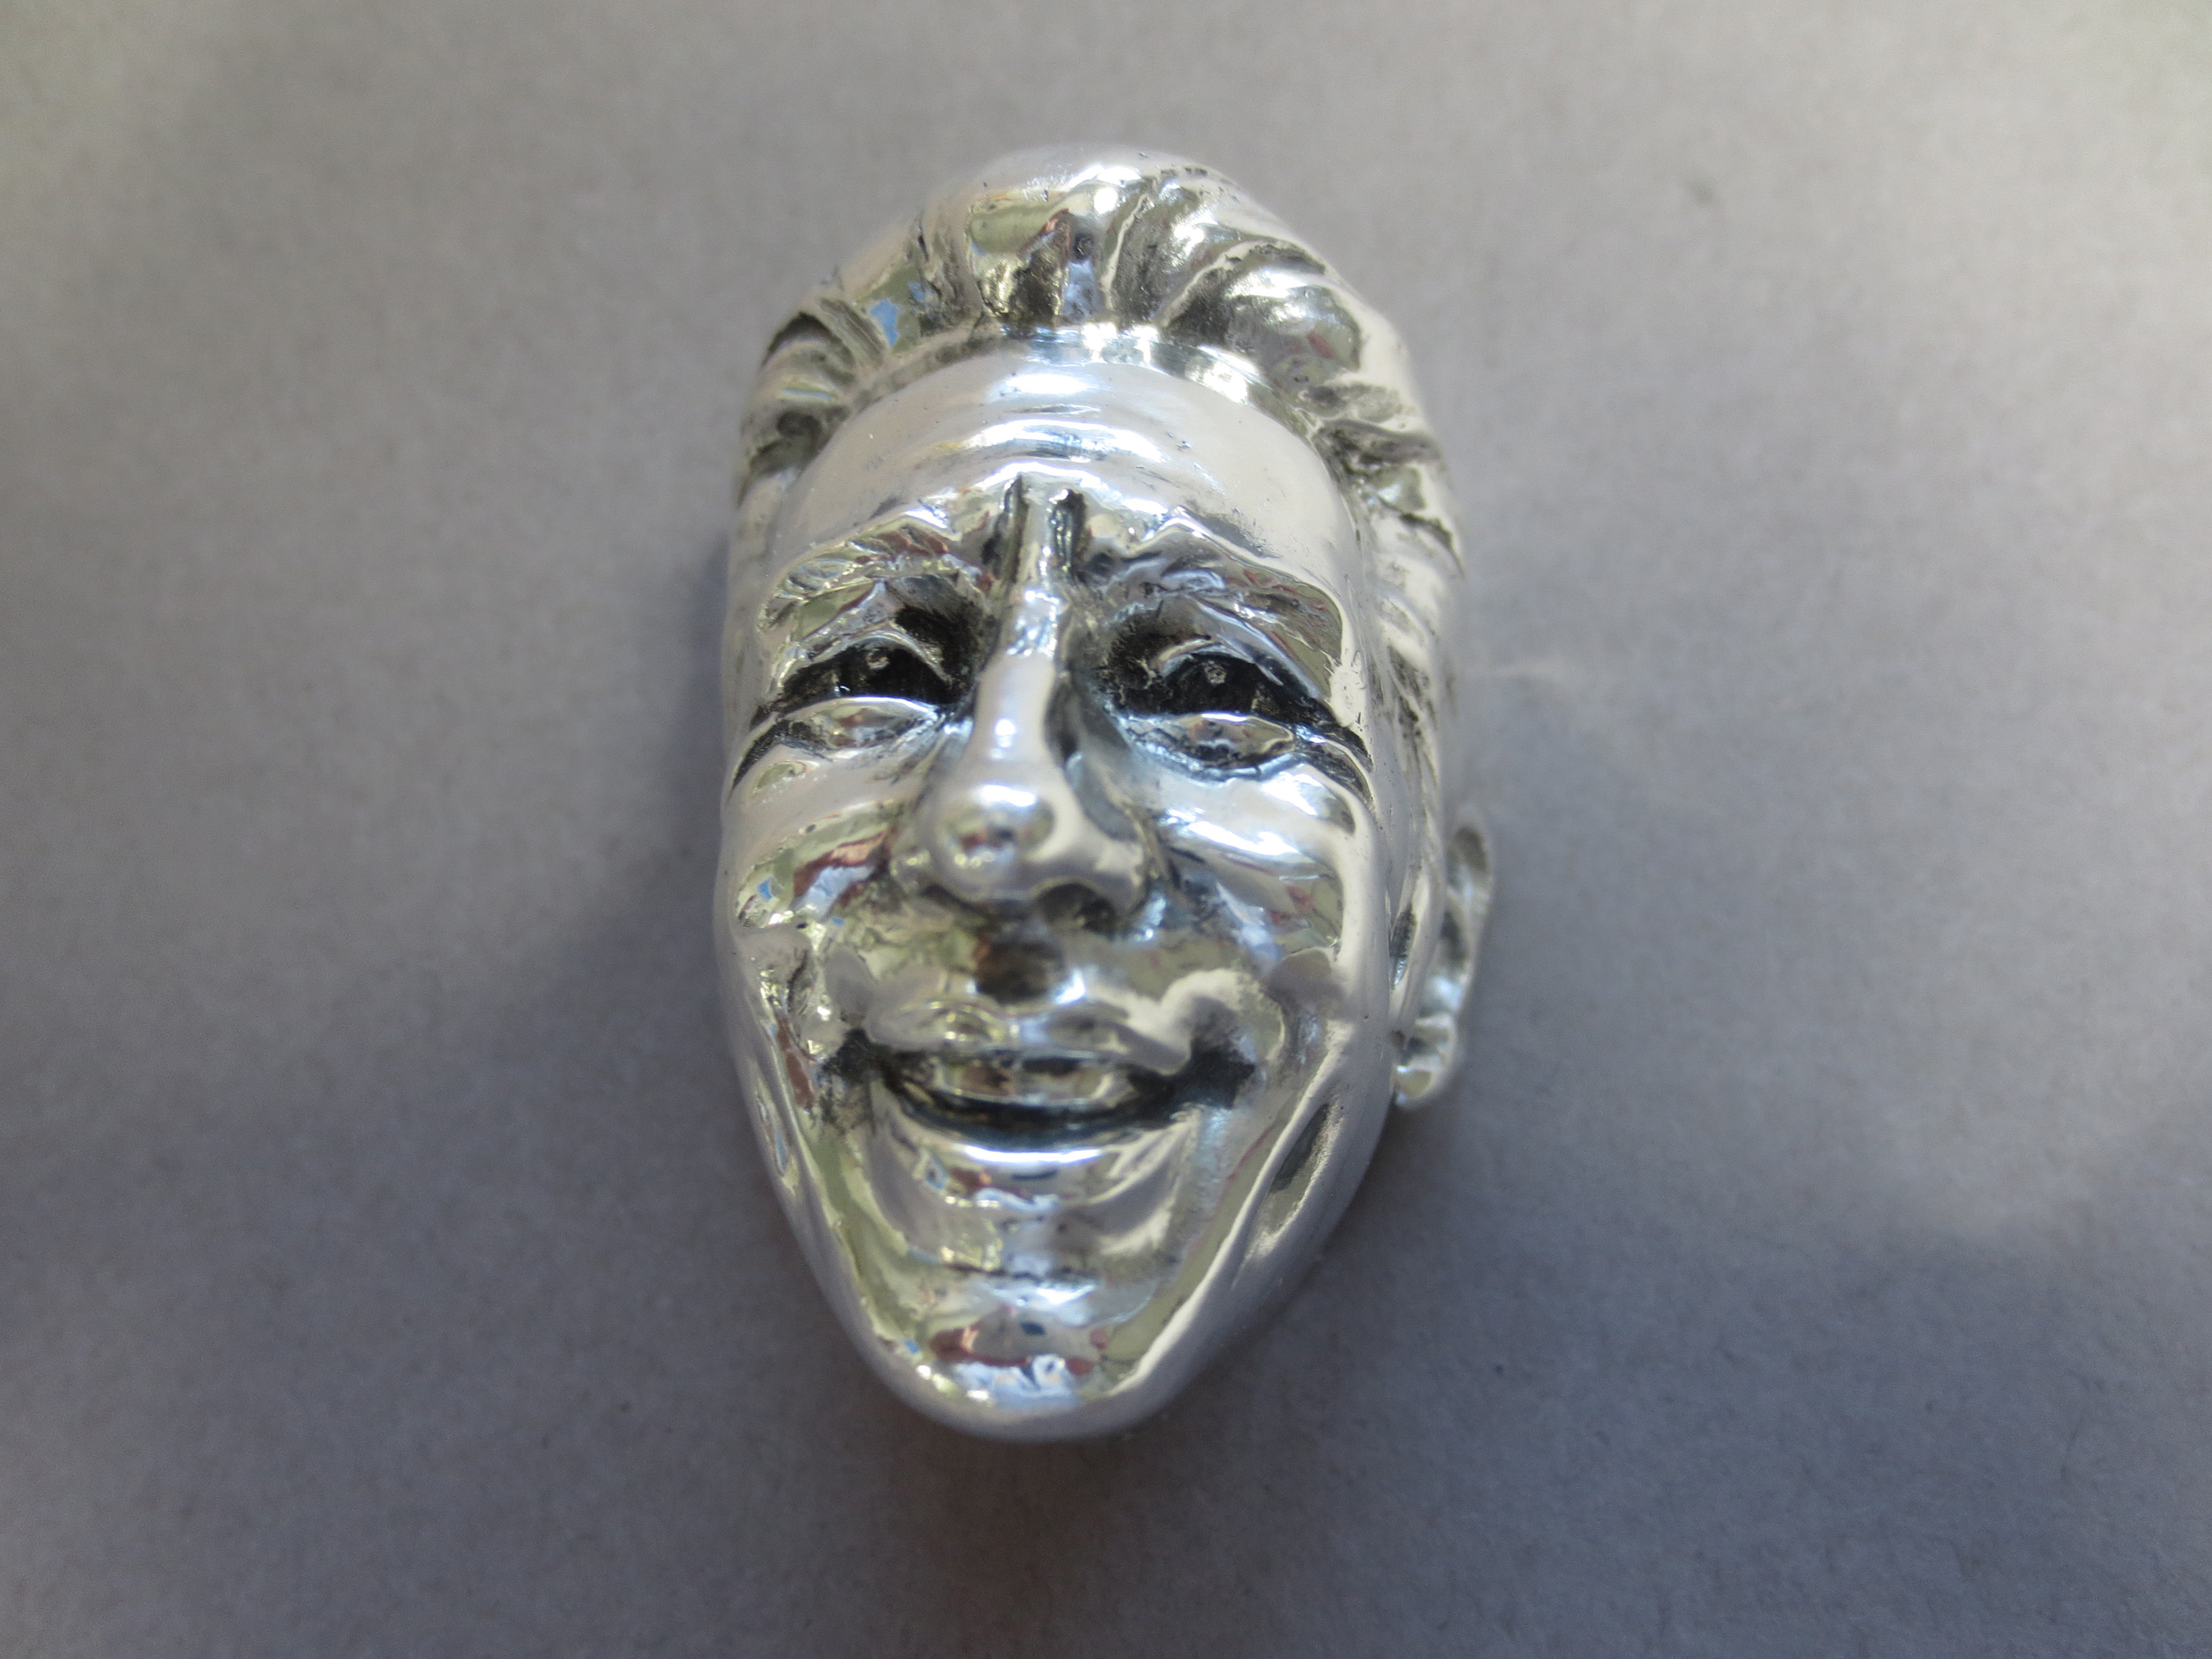 The sterling silver sculpture of Mario Andretti for his Baby Borg trophy commemoration the 50th anniversary of his Indianapolis 500 win.